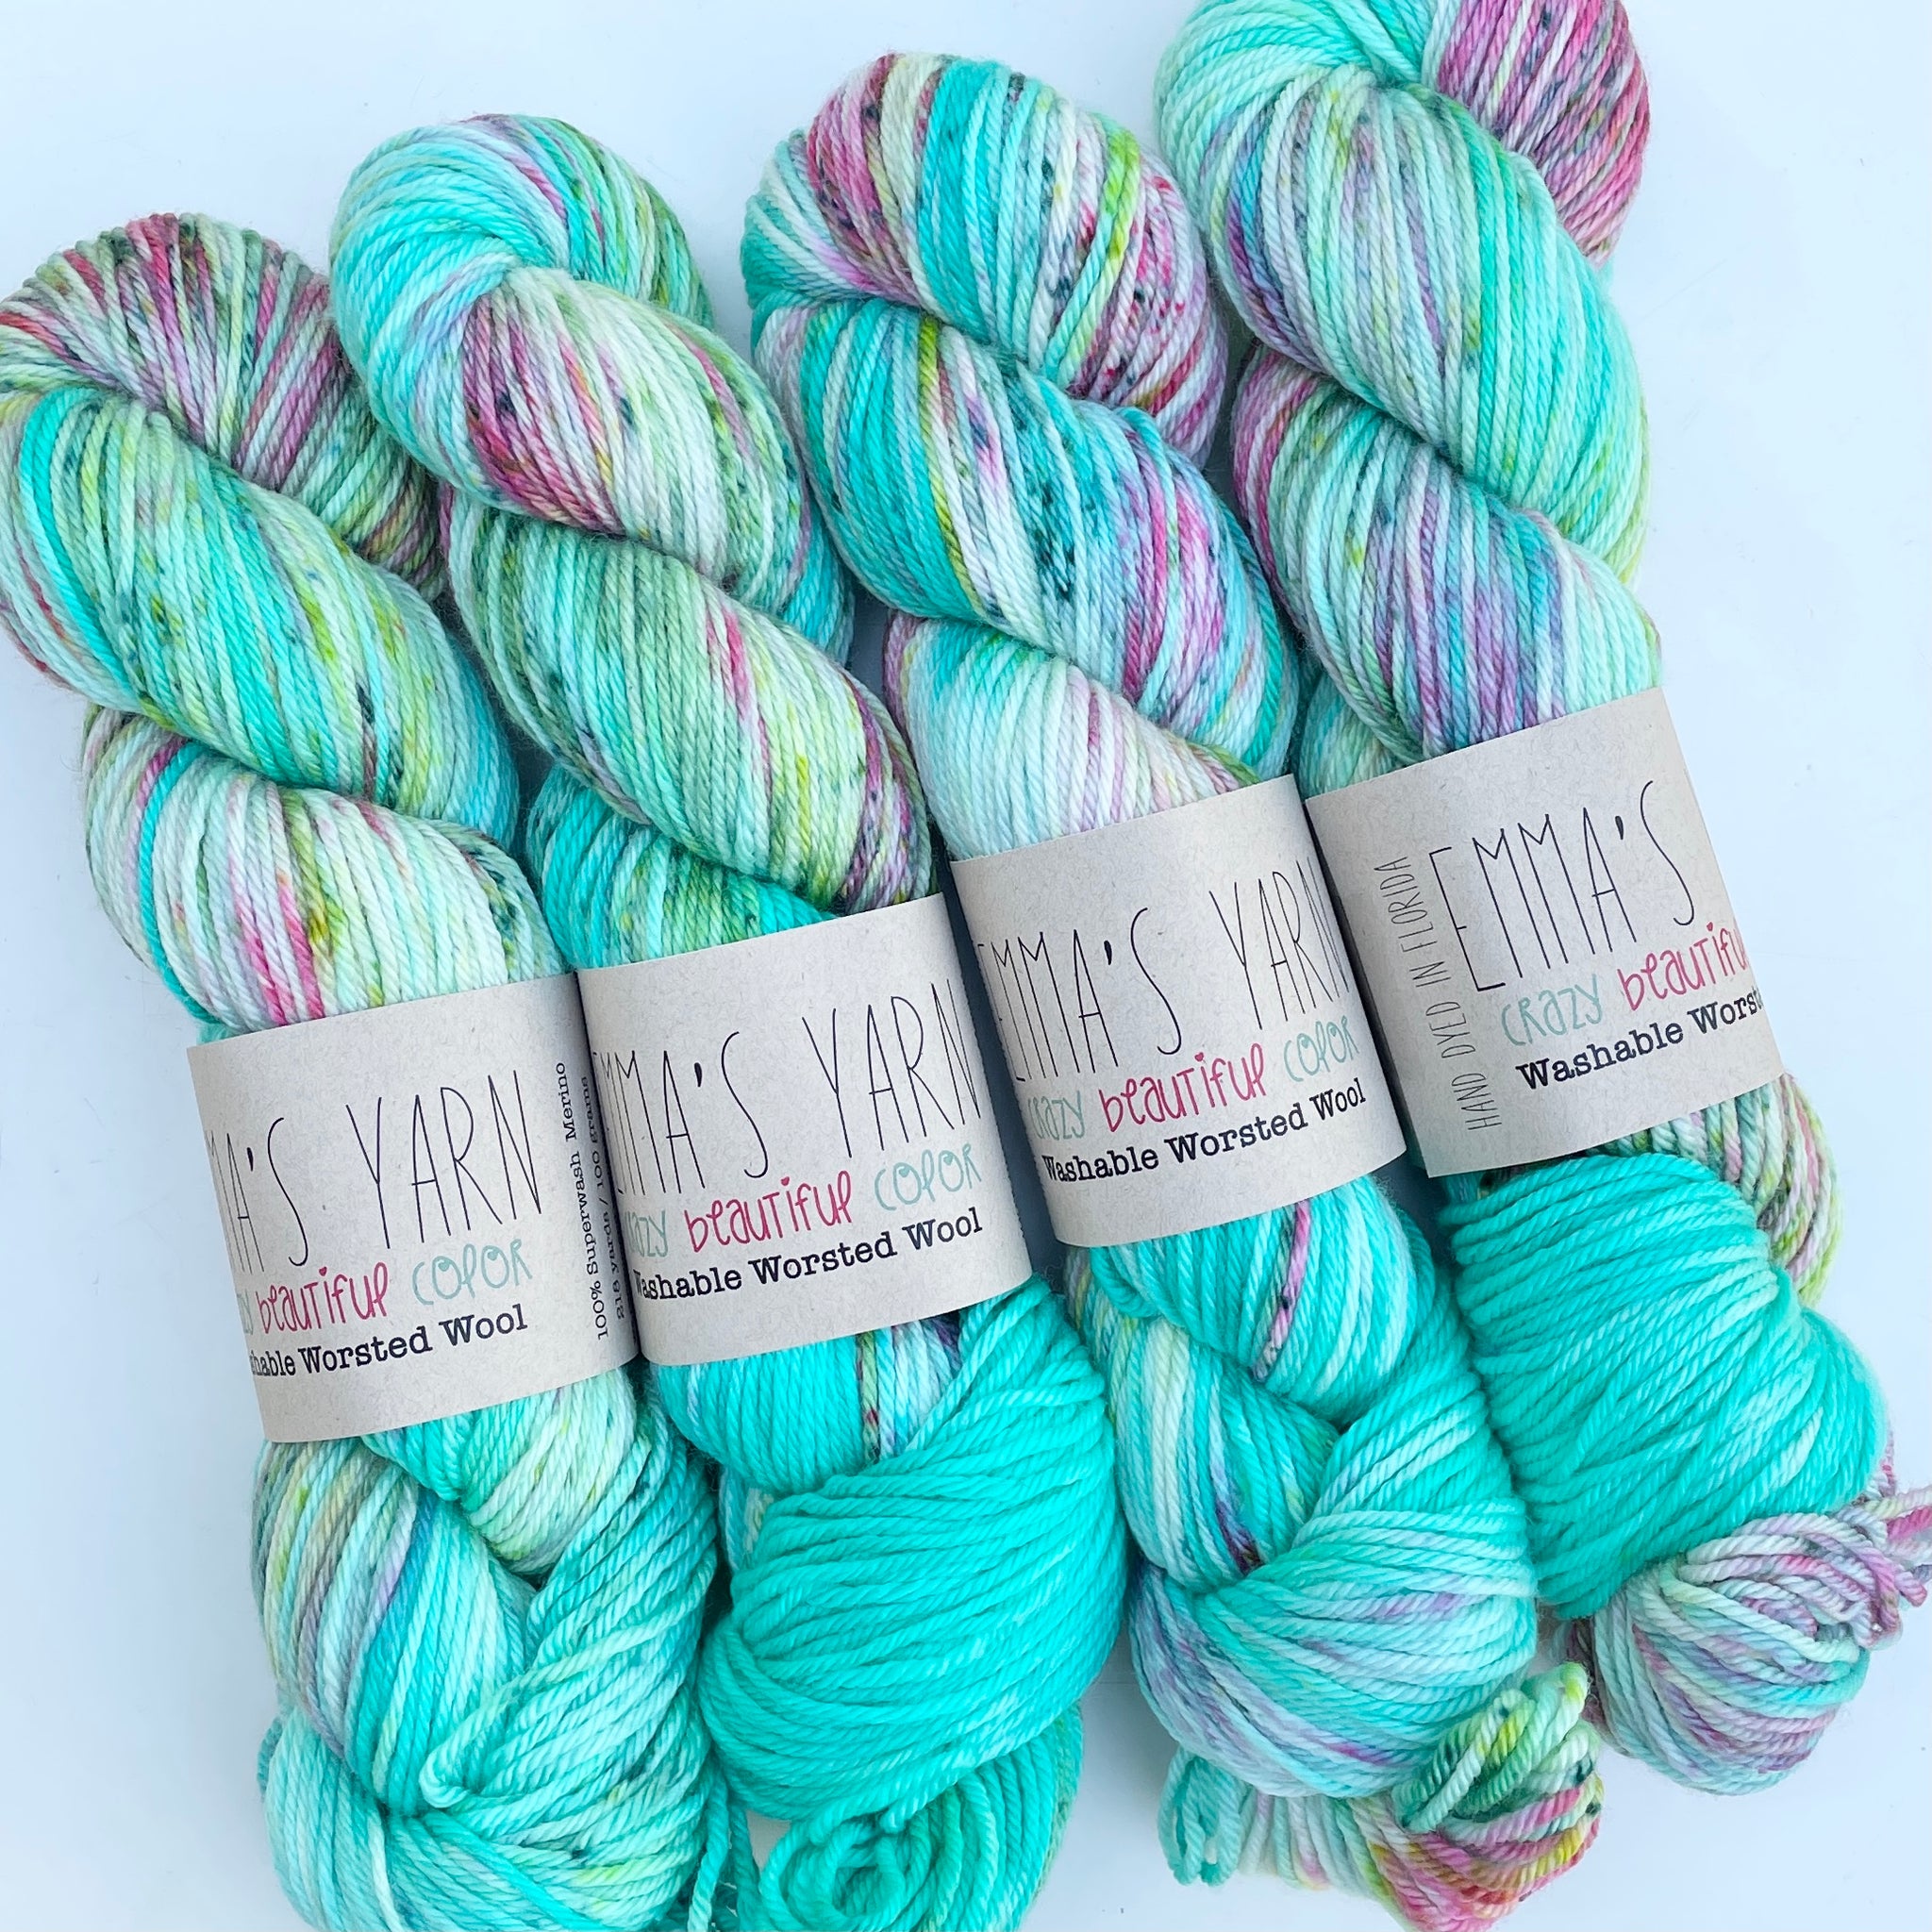 Happily Ever After - Washable Worsted Wool